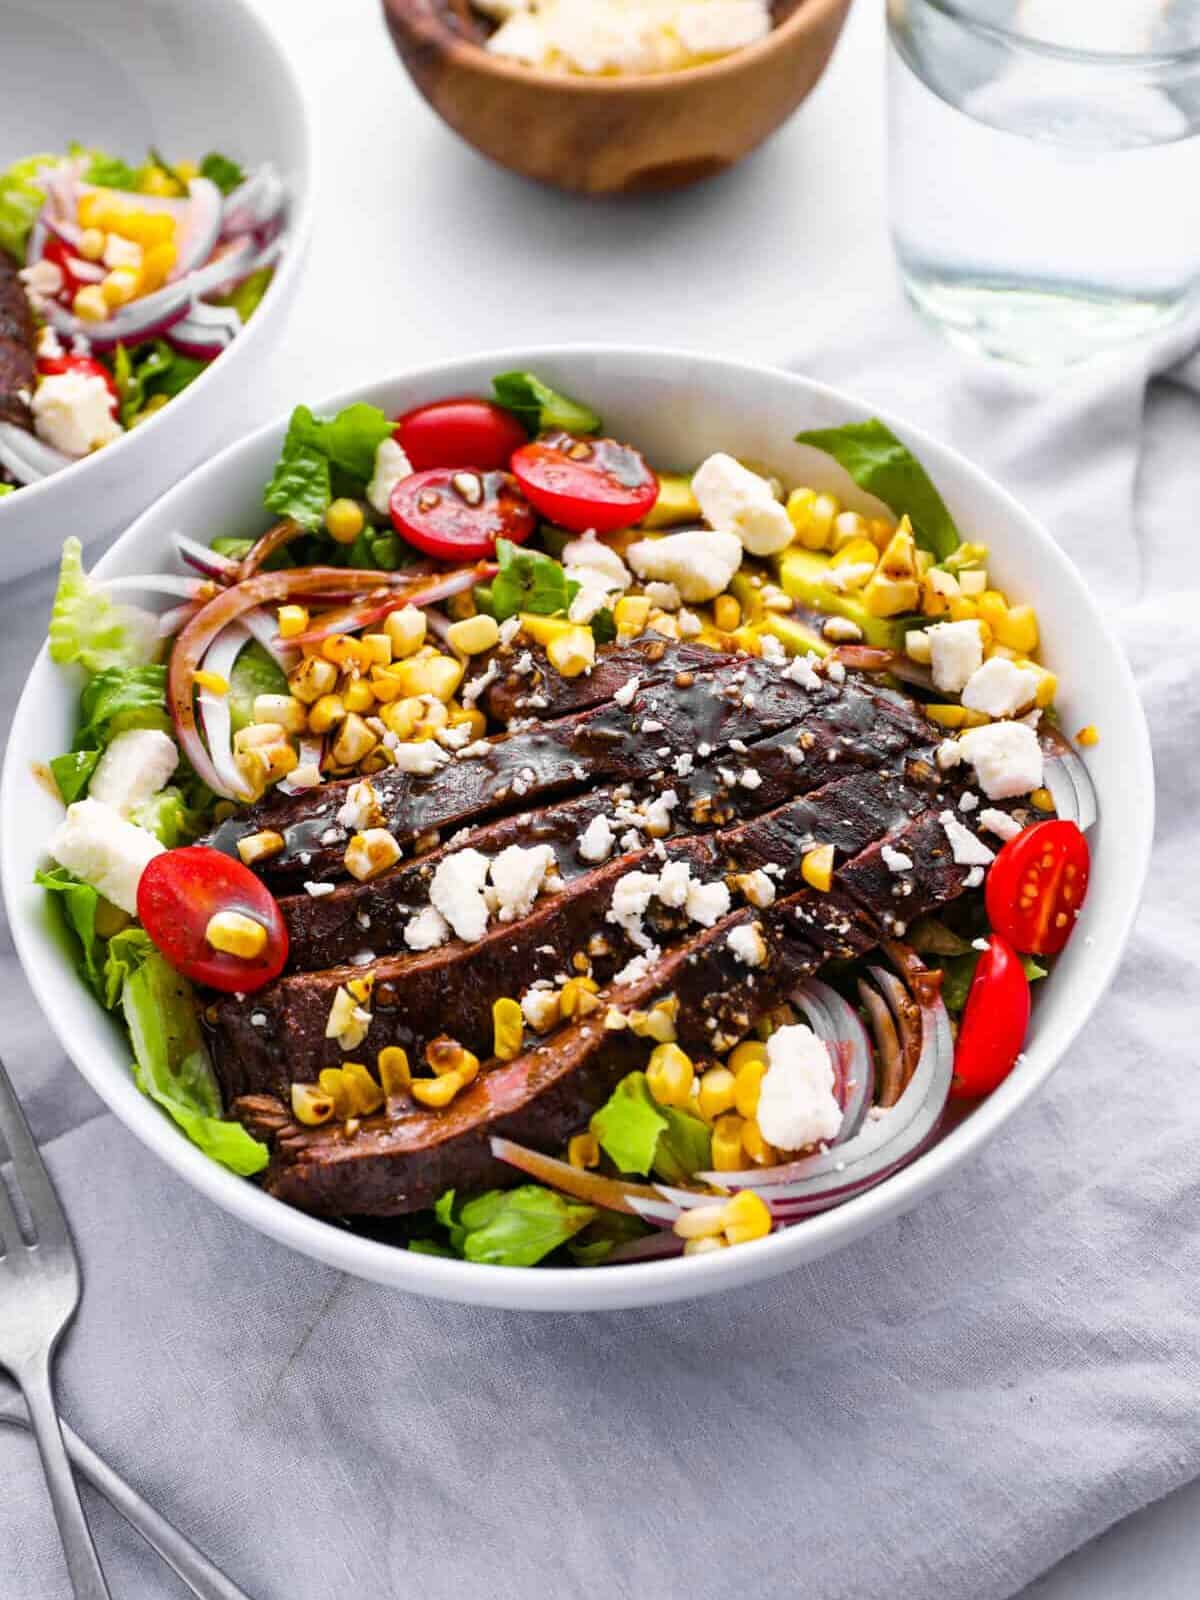 steak salad with homemade dressing in a white bowl.